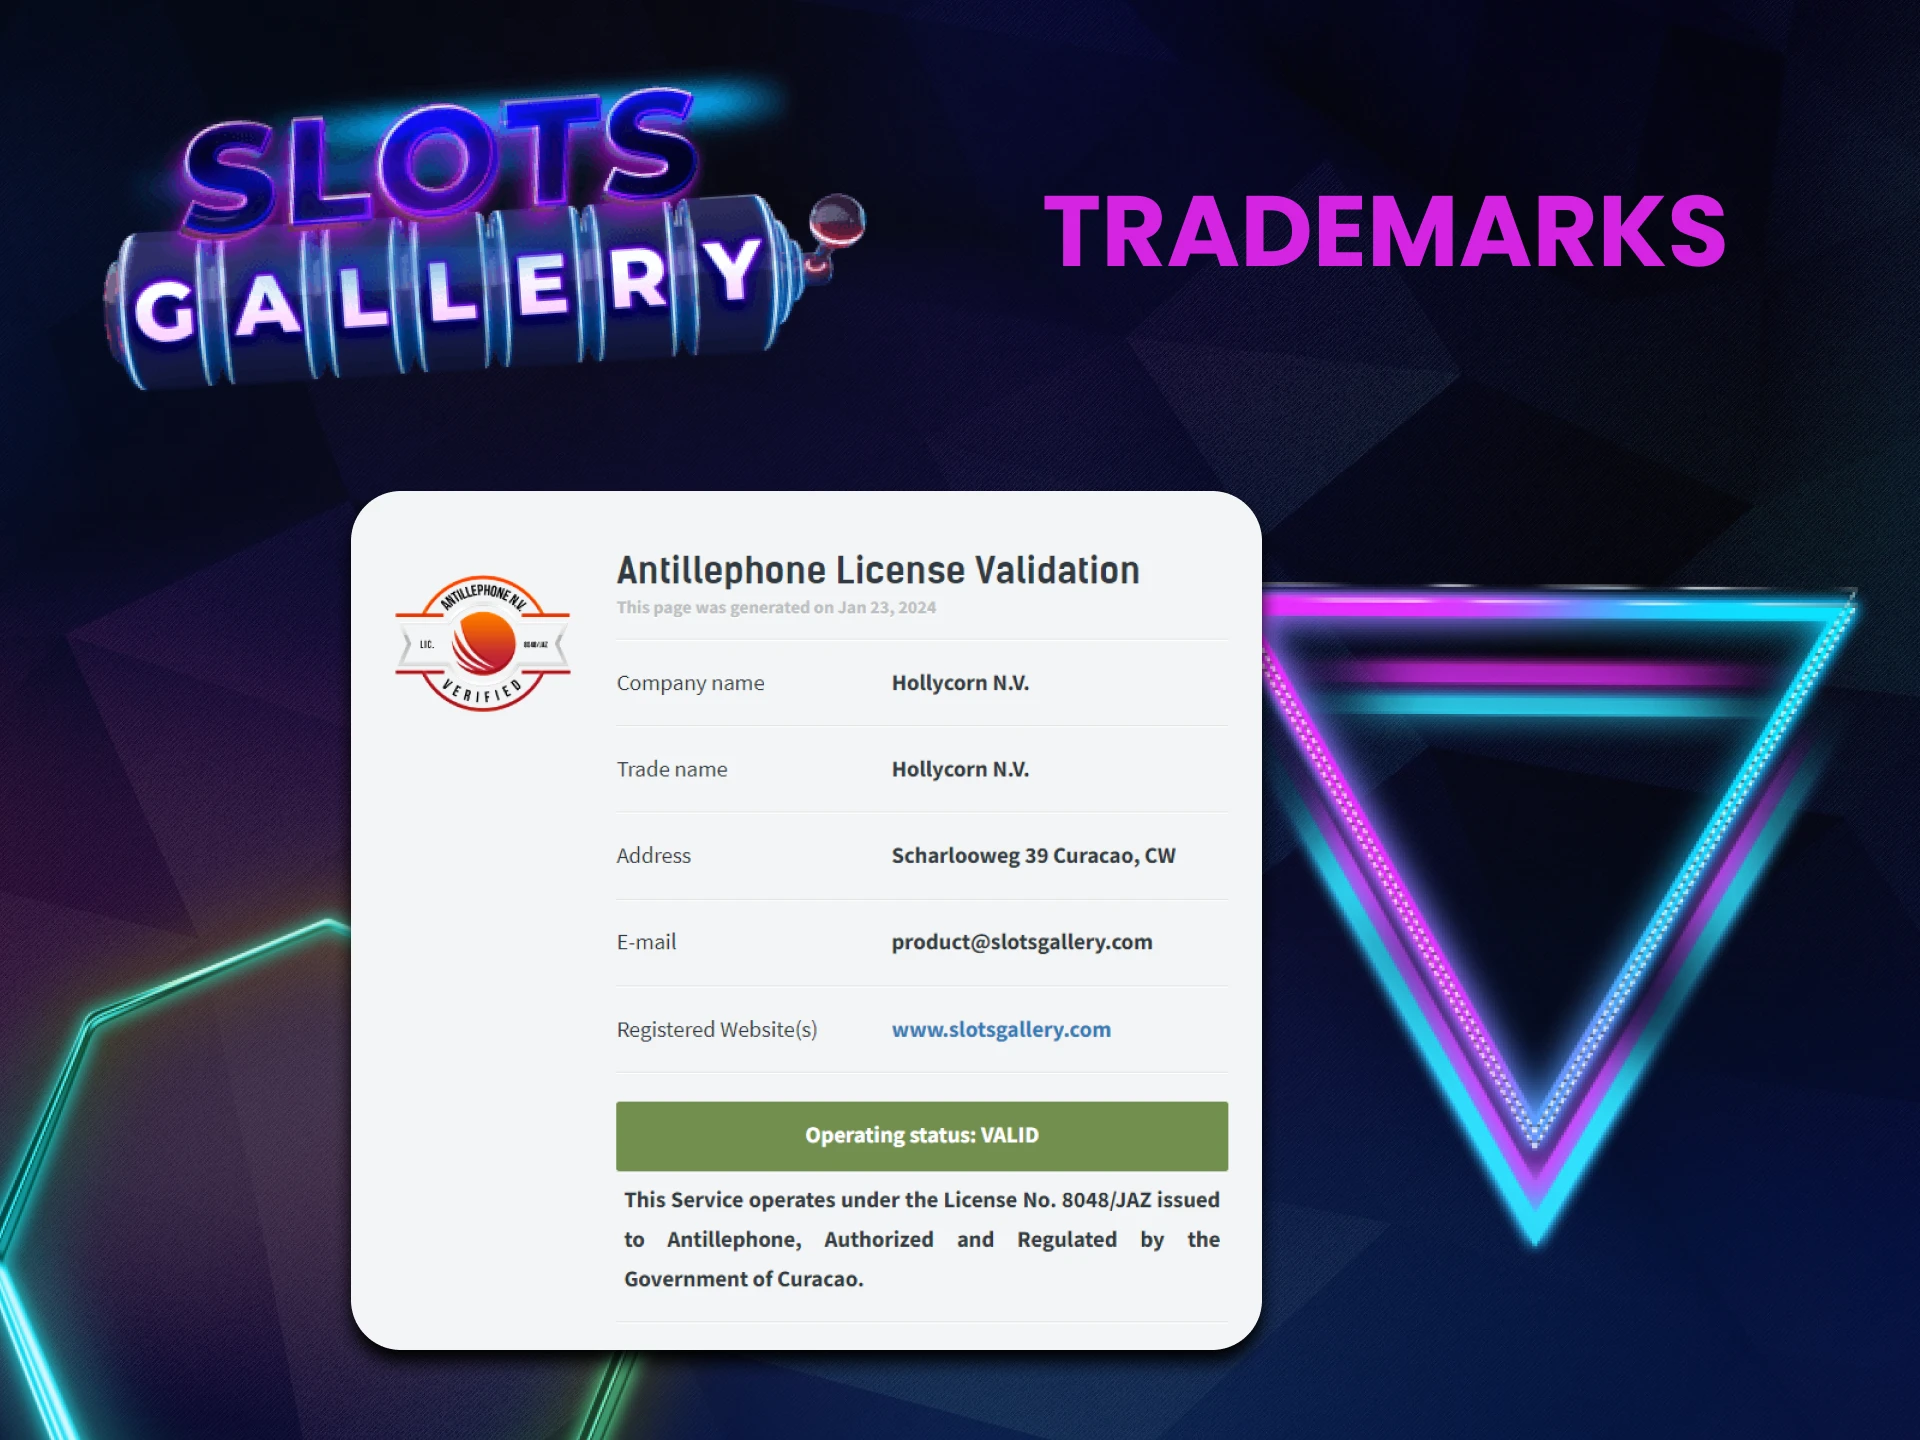 Find out who owns the trademarks on the Slots Gallery website.